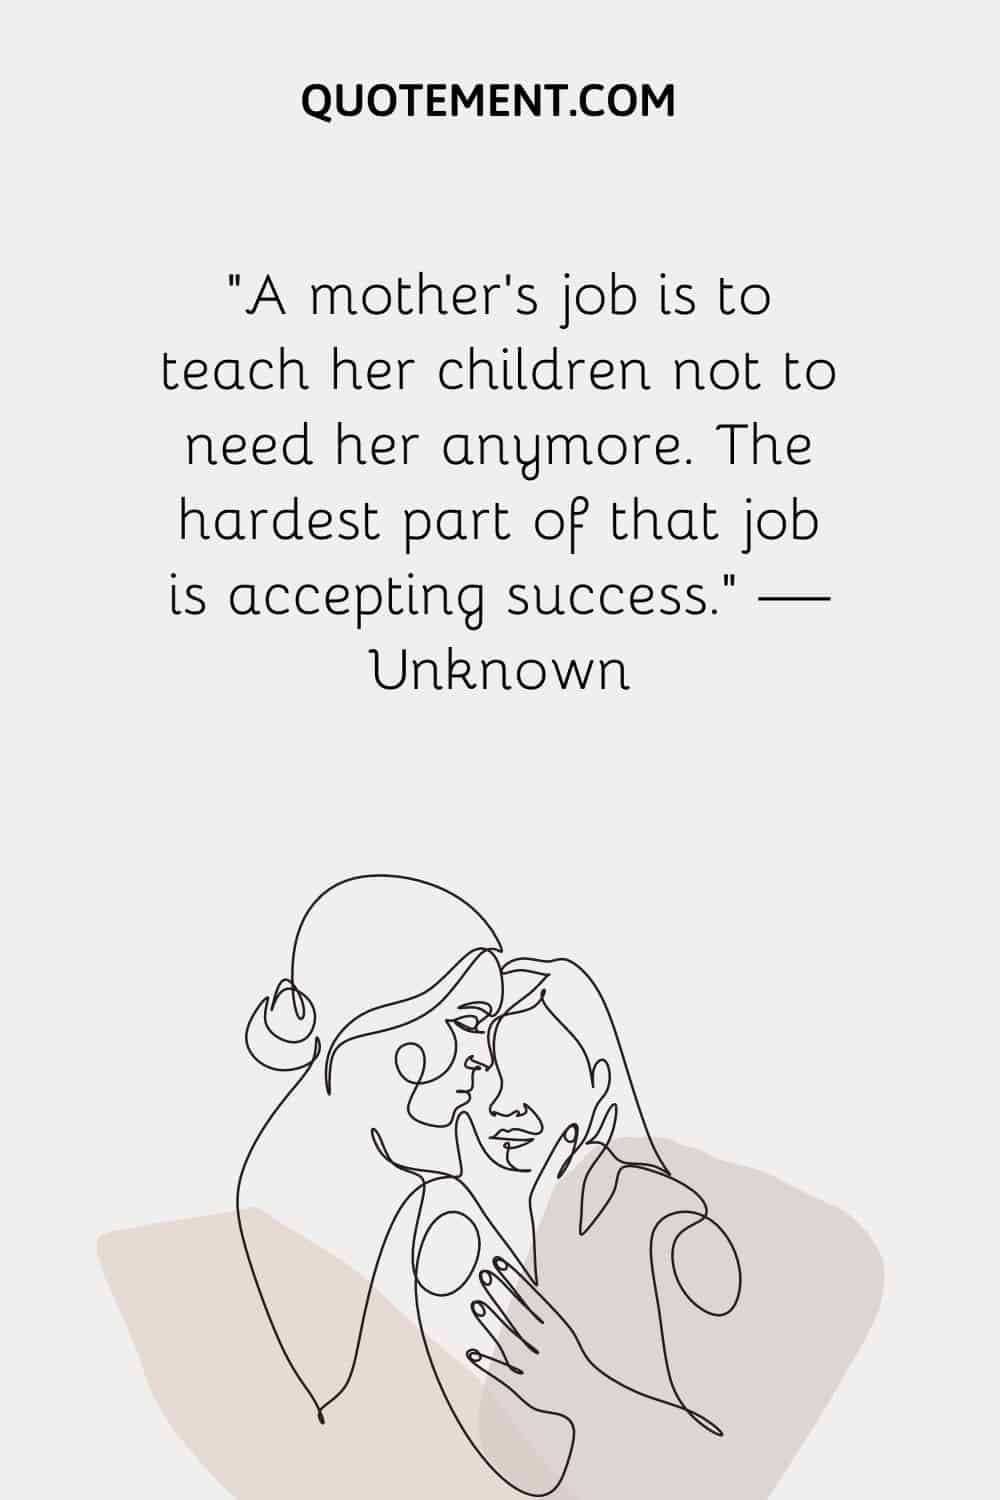 “A mother’s job is to teach her children not to need her anymore. The hardest part of that job is accepting success.” — Unknown